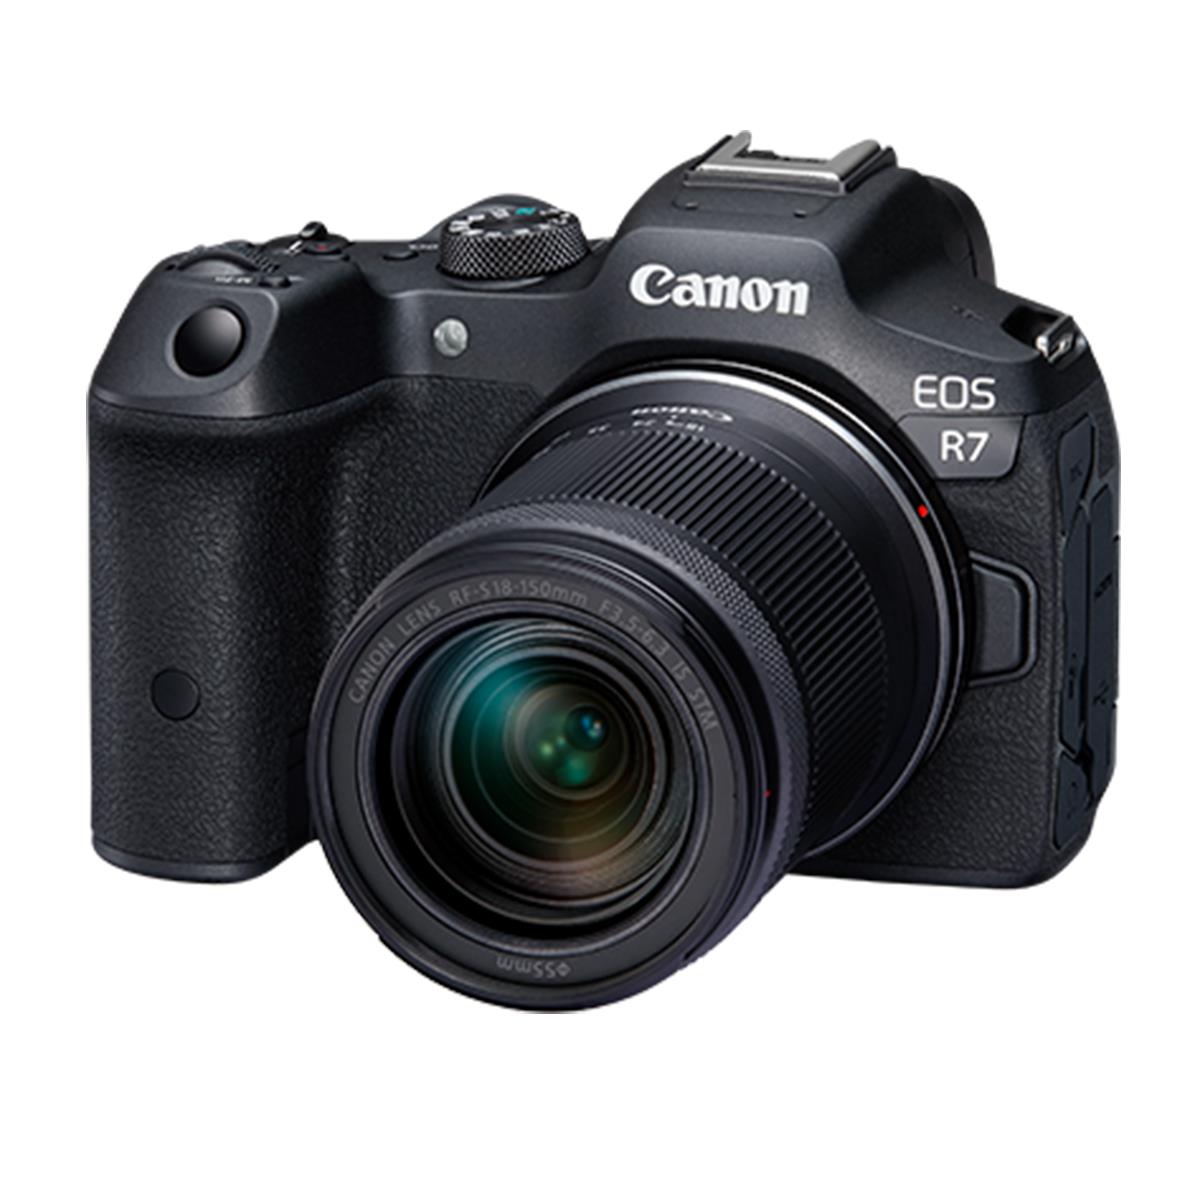 Image of Canon EOS R7 Mirrorless Camera with RF-S 18-150mm f/3.5-6.3 IS STM Lens